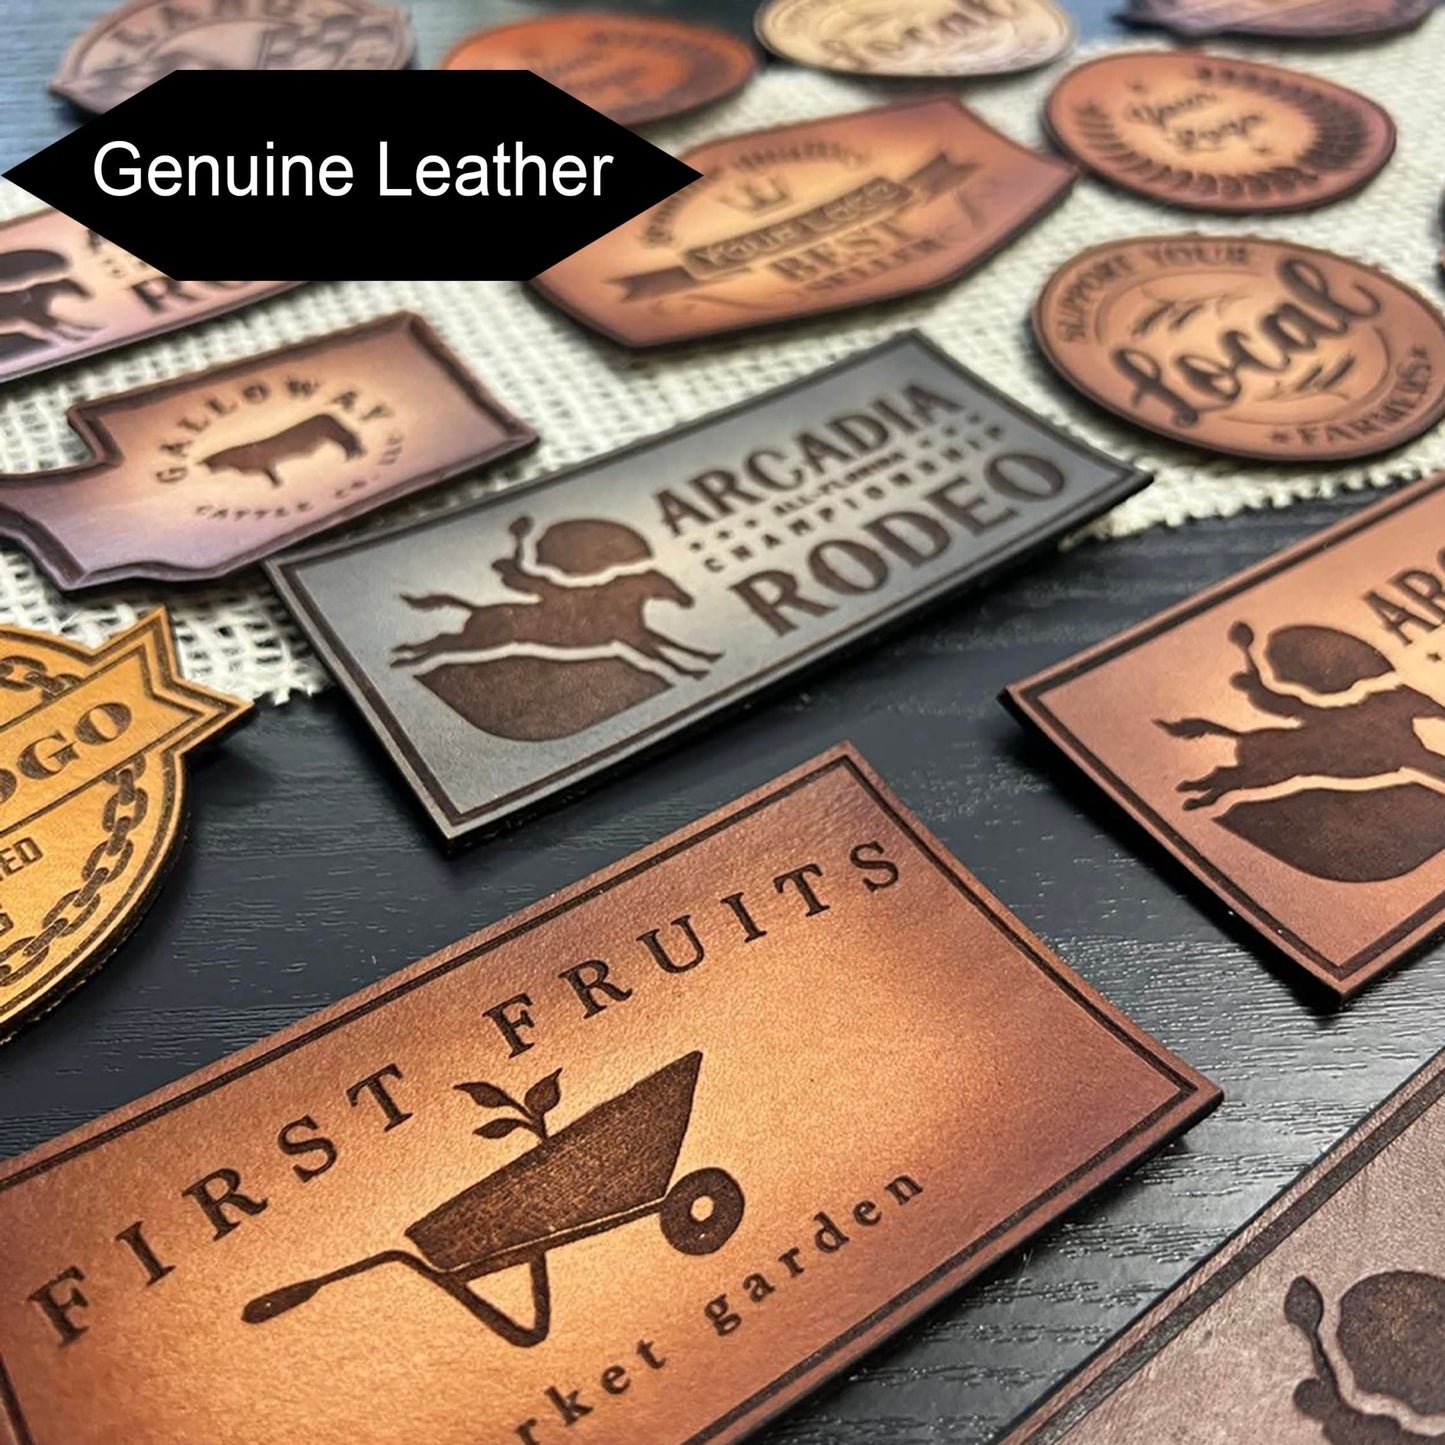 Custom Genuine Leather Patches for Groups, Events, Business, Churches, –  patchpalooza